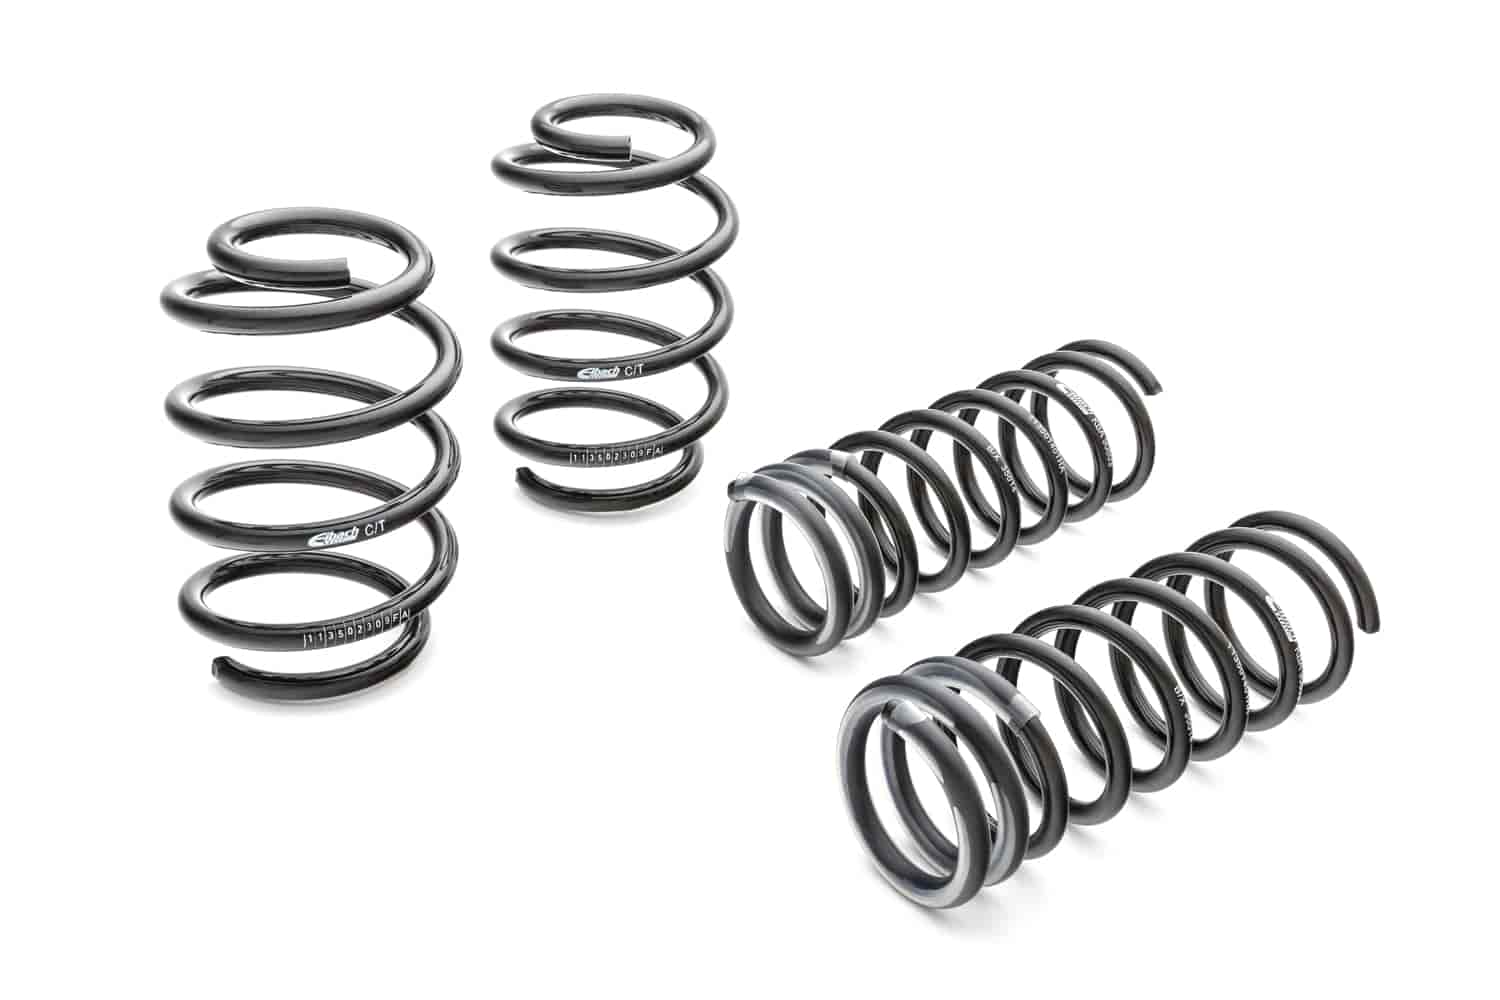 E10-23-018-01-22 Pro-Kit Lowering Springs 2016-2018 Camaro SS/ZL1 Coupe - 1.100 in. Front/Rear Drop